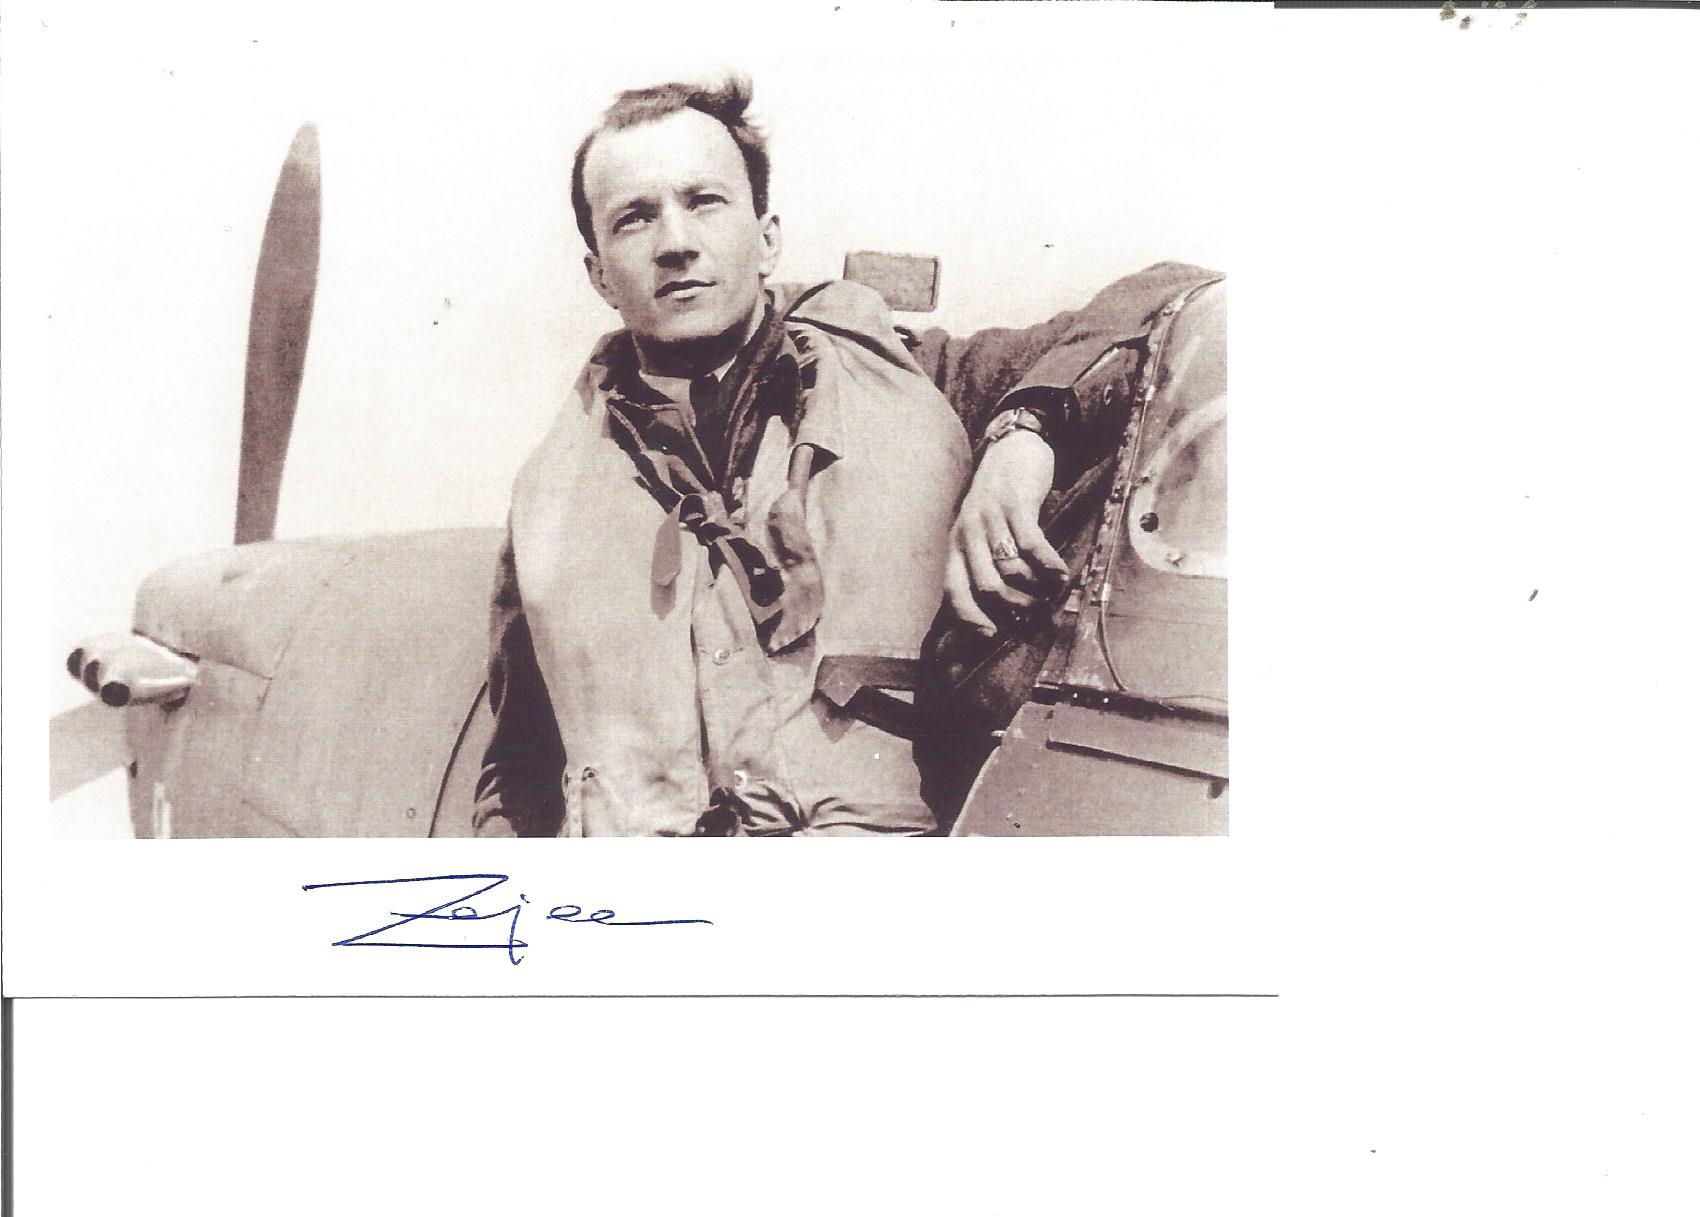 Wladyslaw Zajac WW2 fighter ace 315 Sqn signed 7 x 5 portrait photo from Ted Sergison Battle of